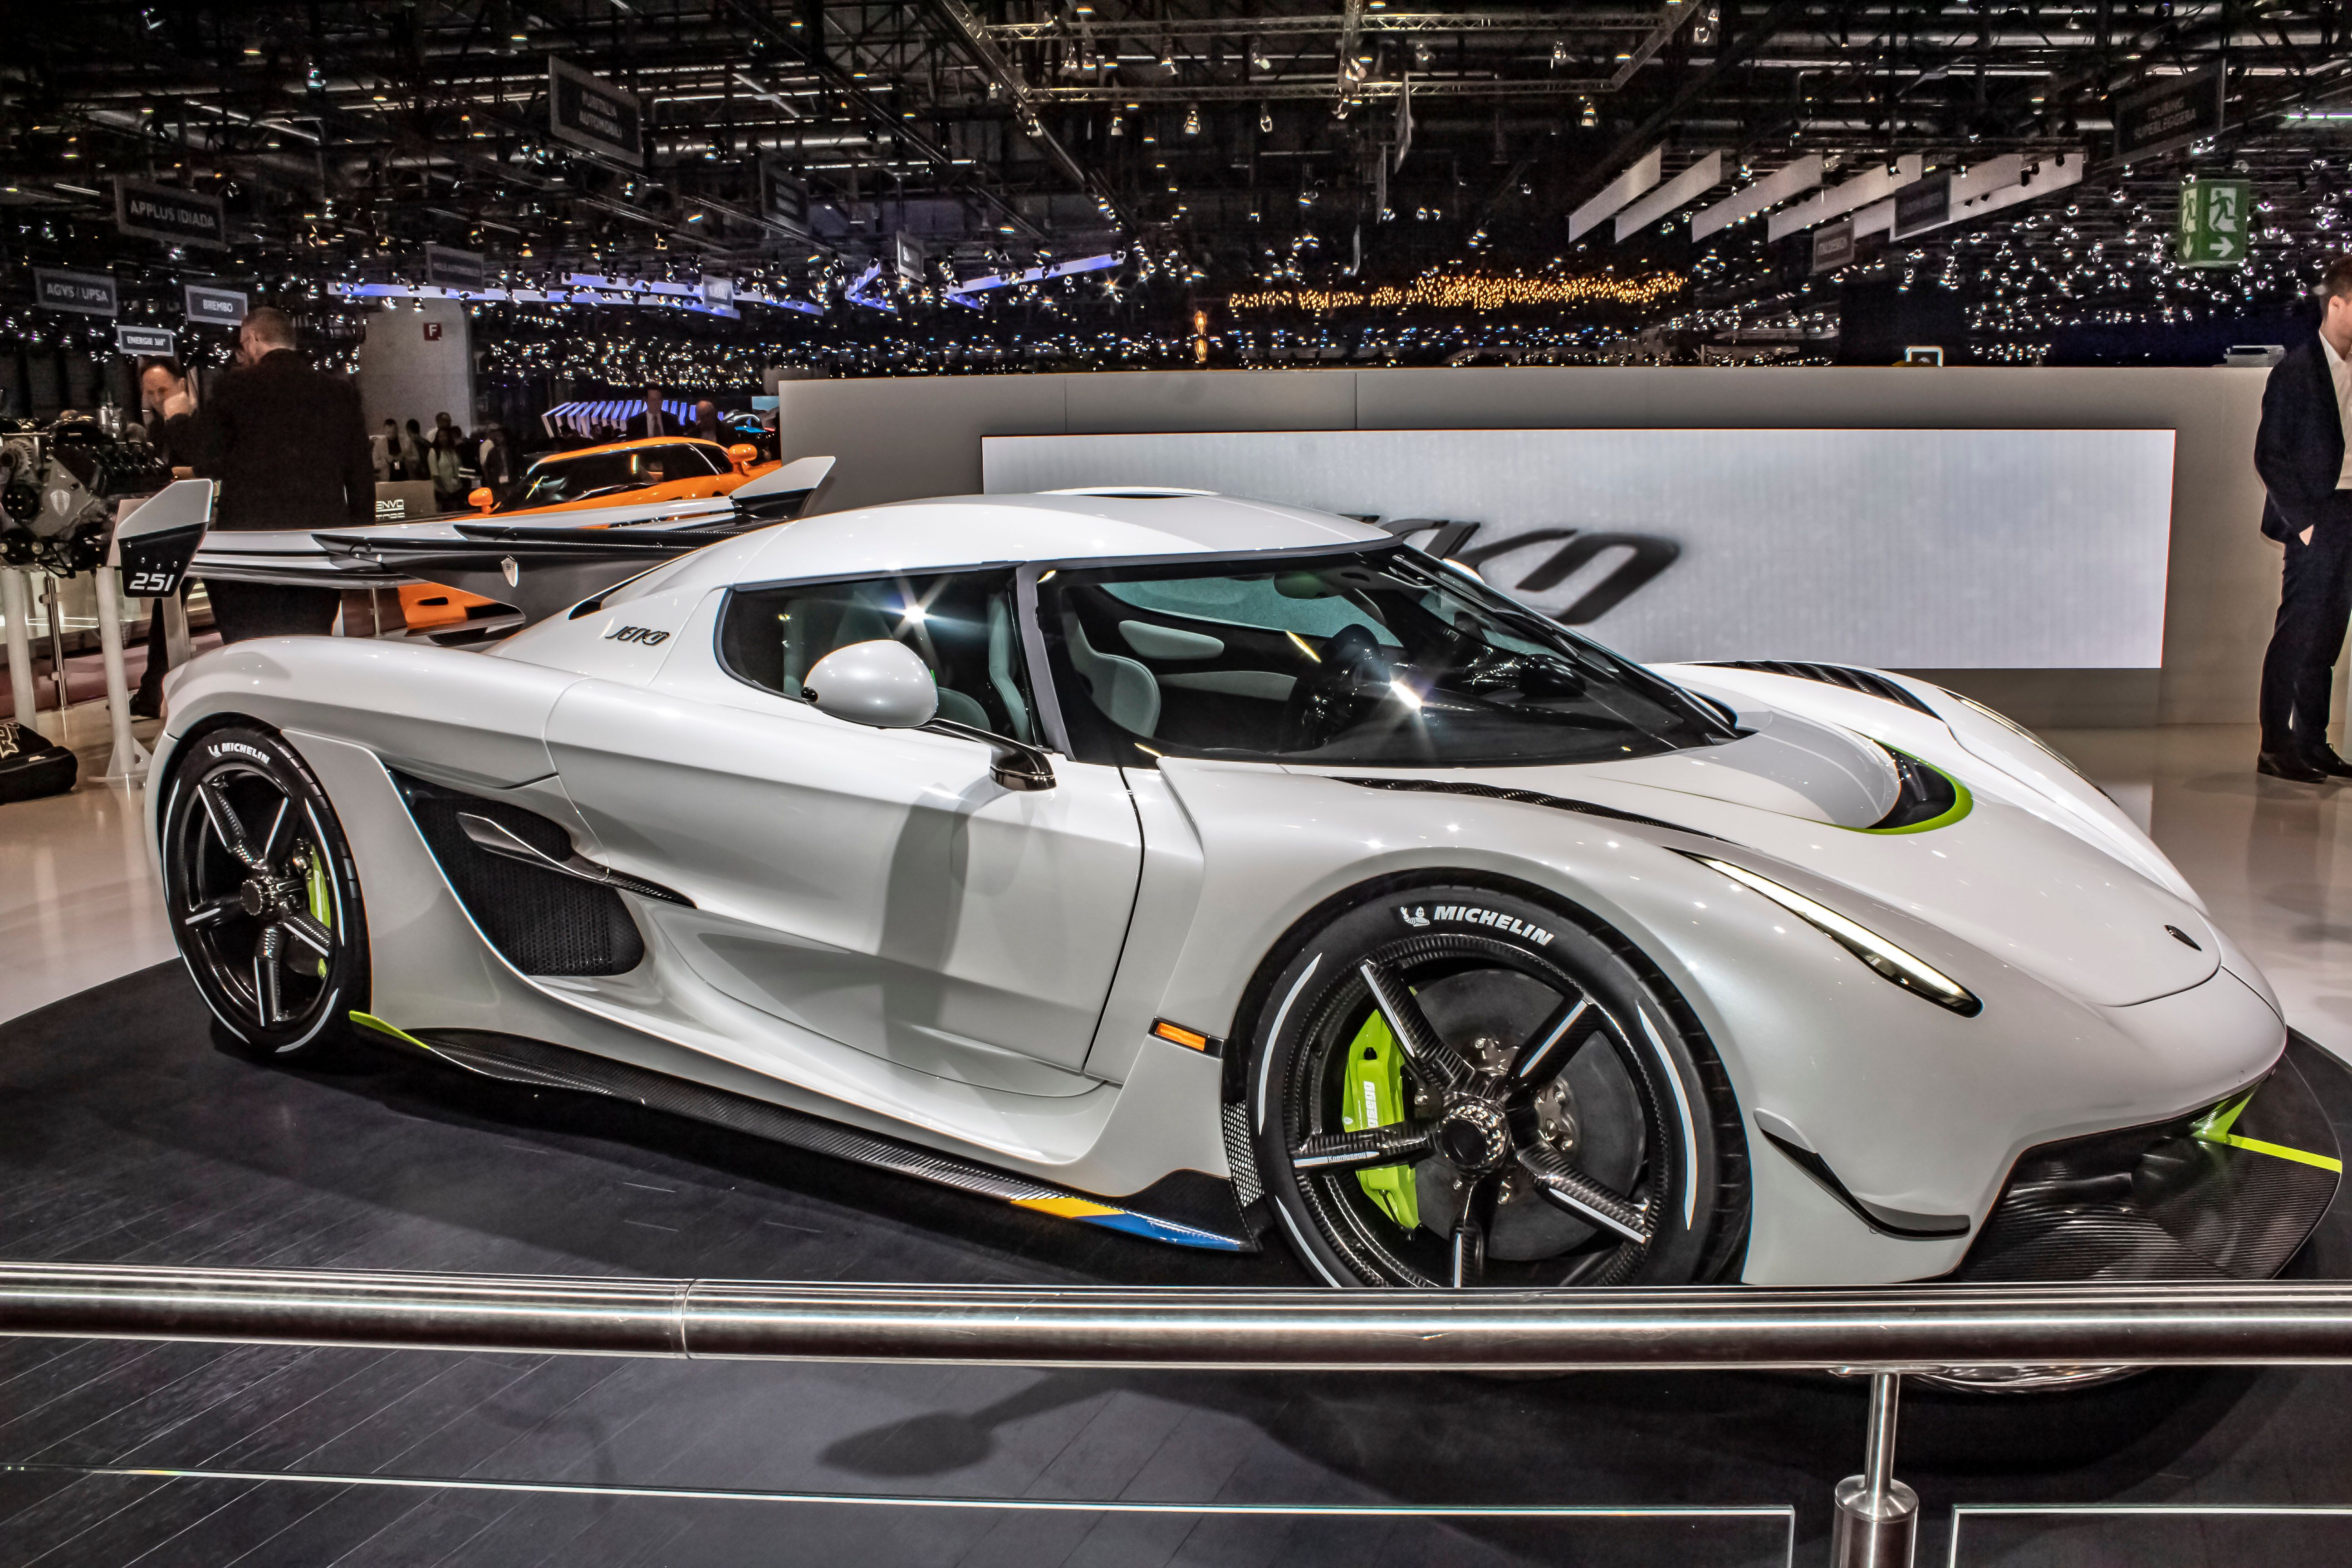 1953 Surprise, Surprise - The 2020 Koenigsegg Jesko is Already Sold Out